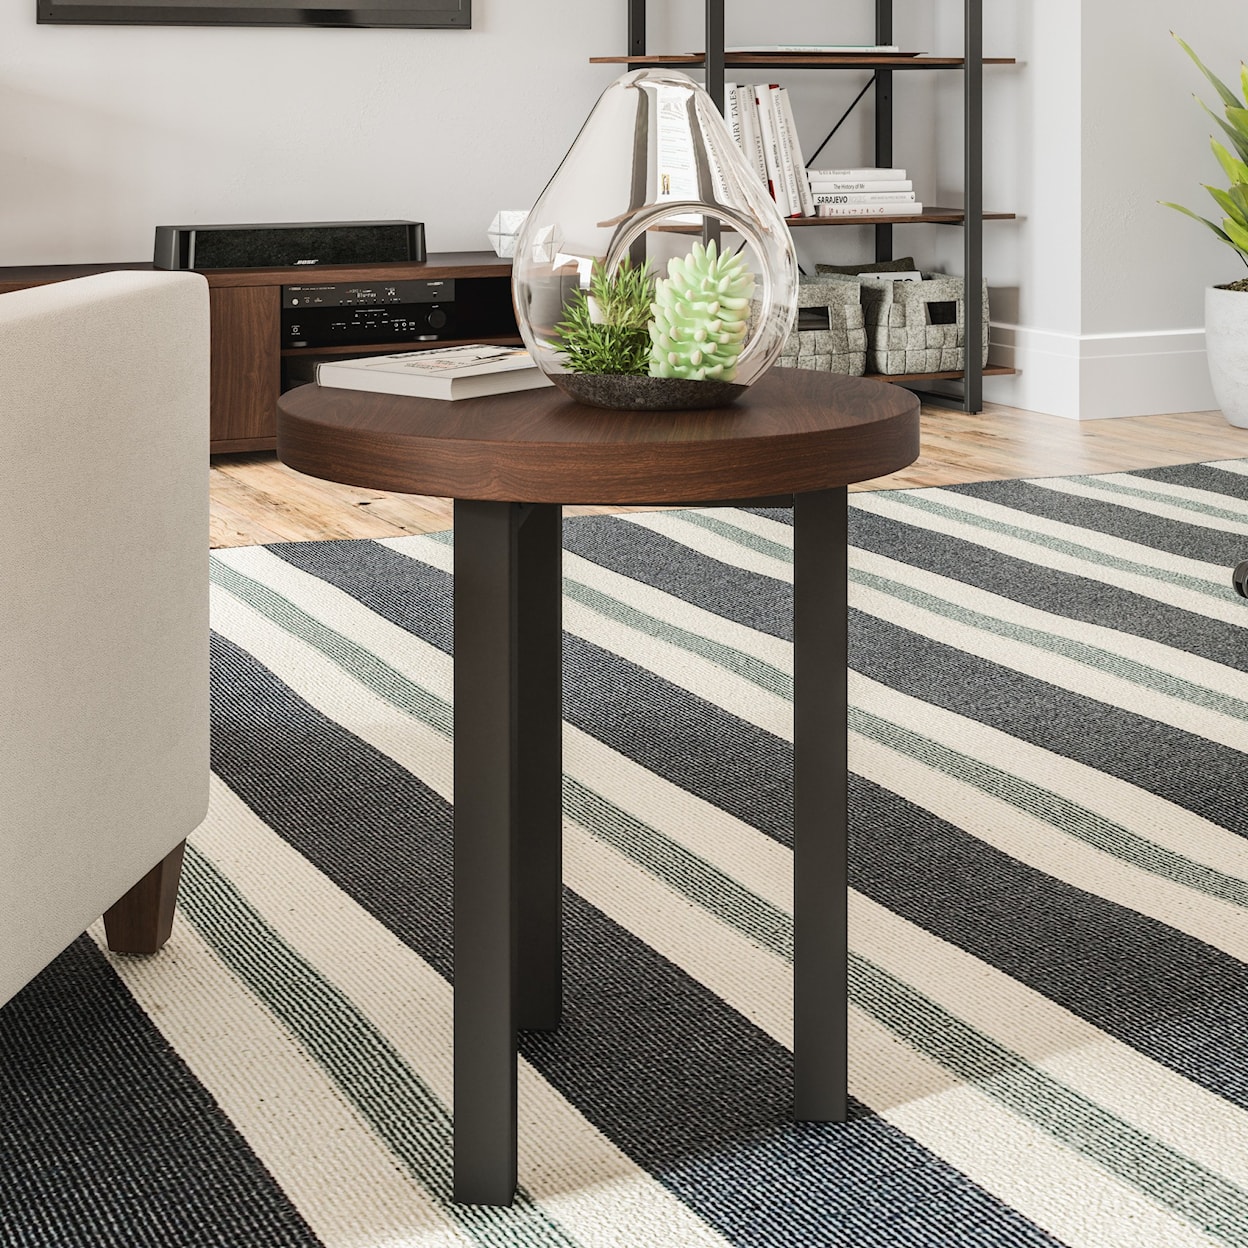 homestyles Merge End Table